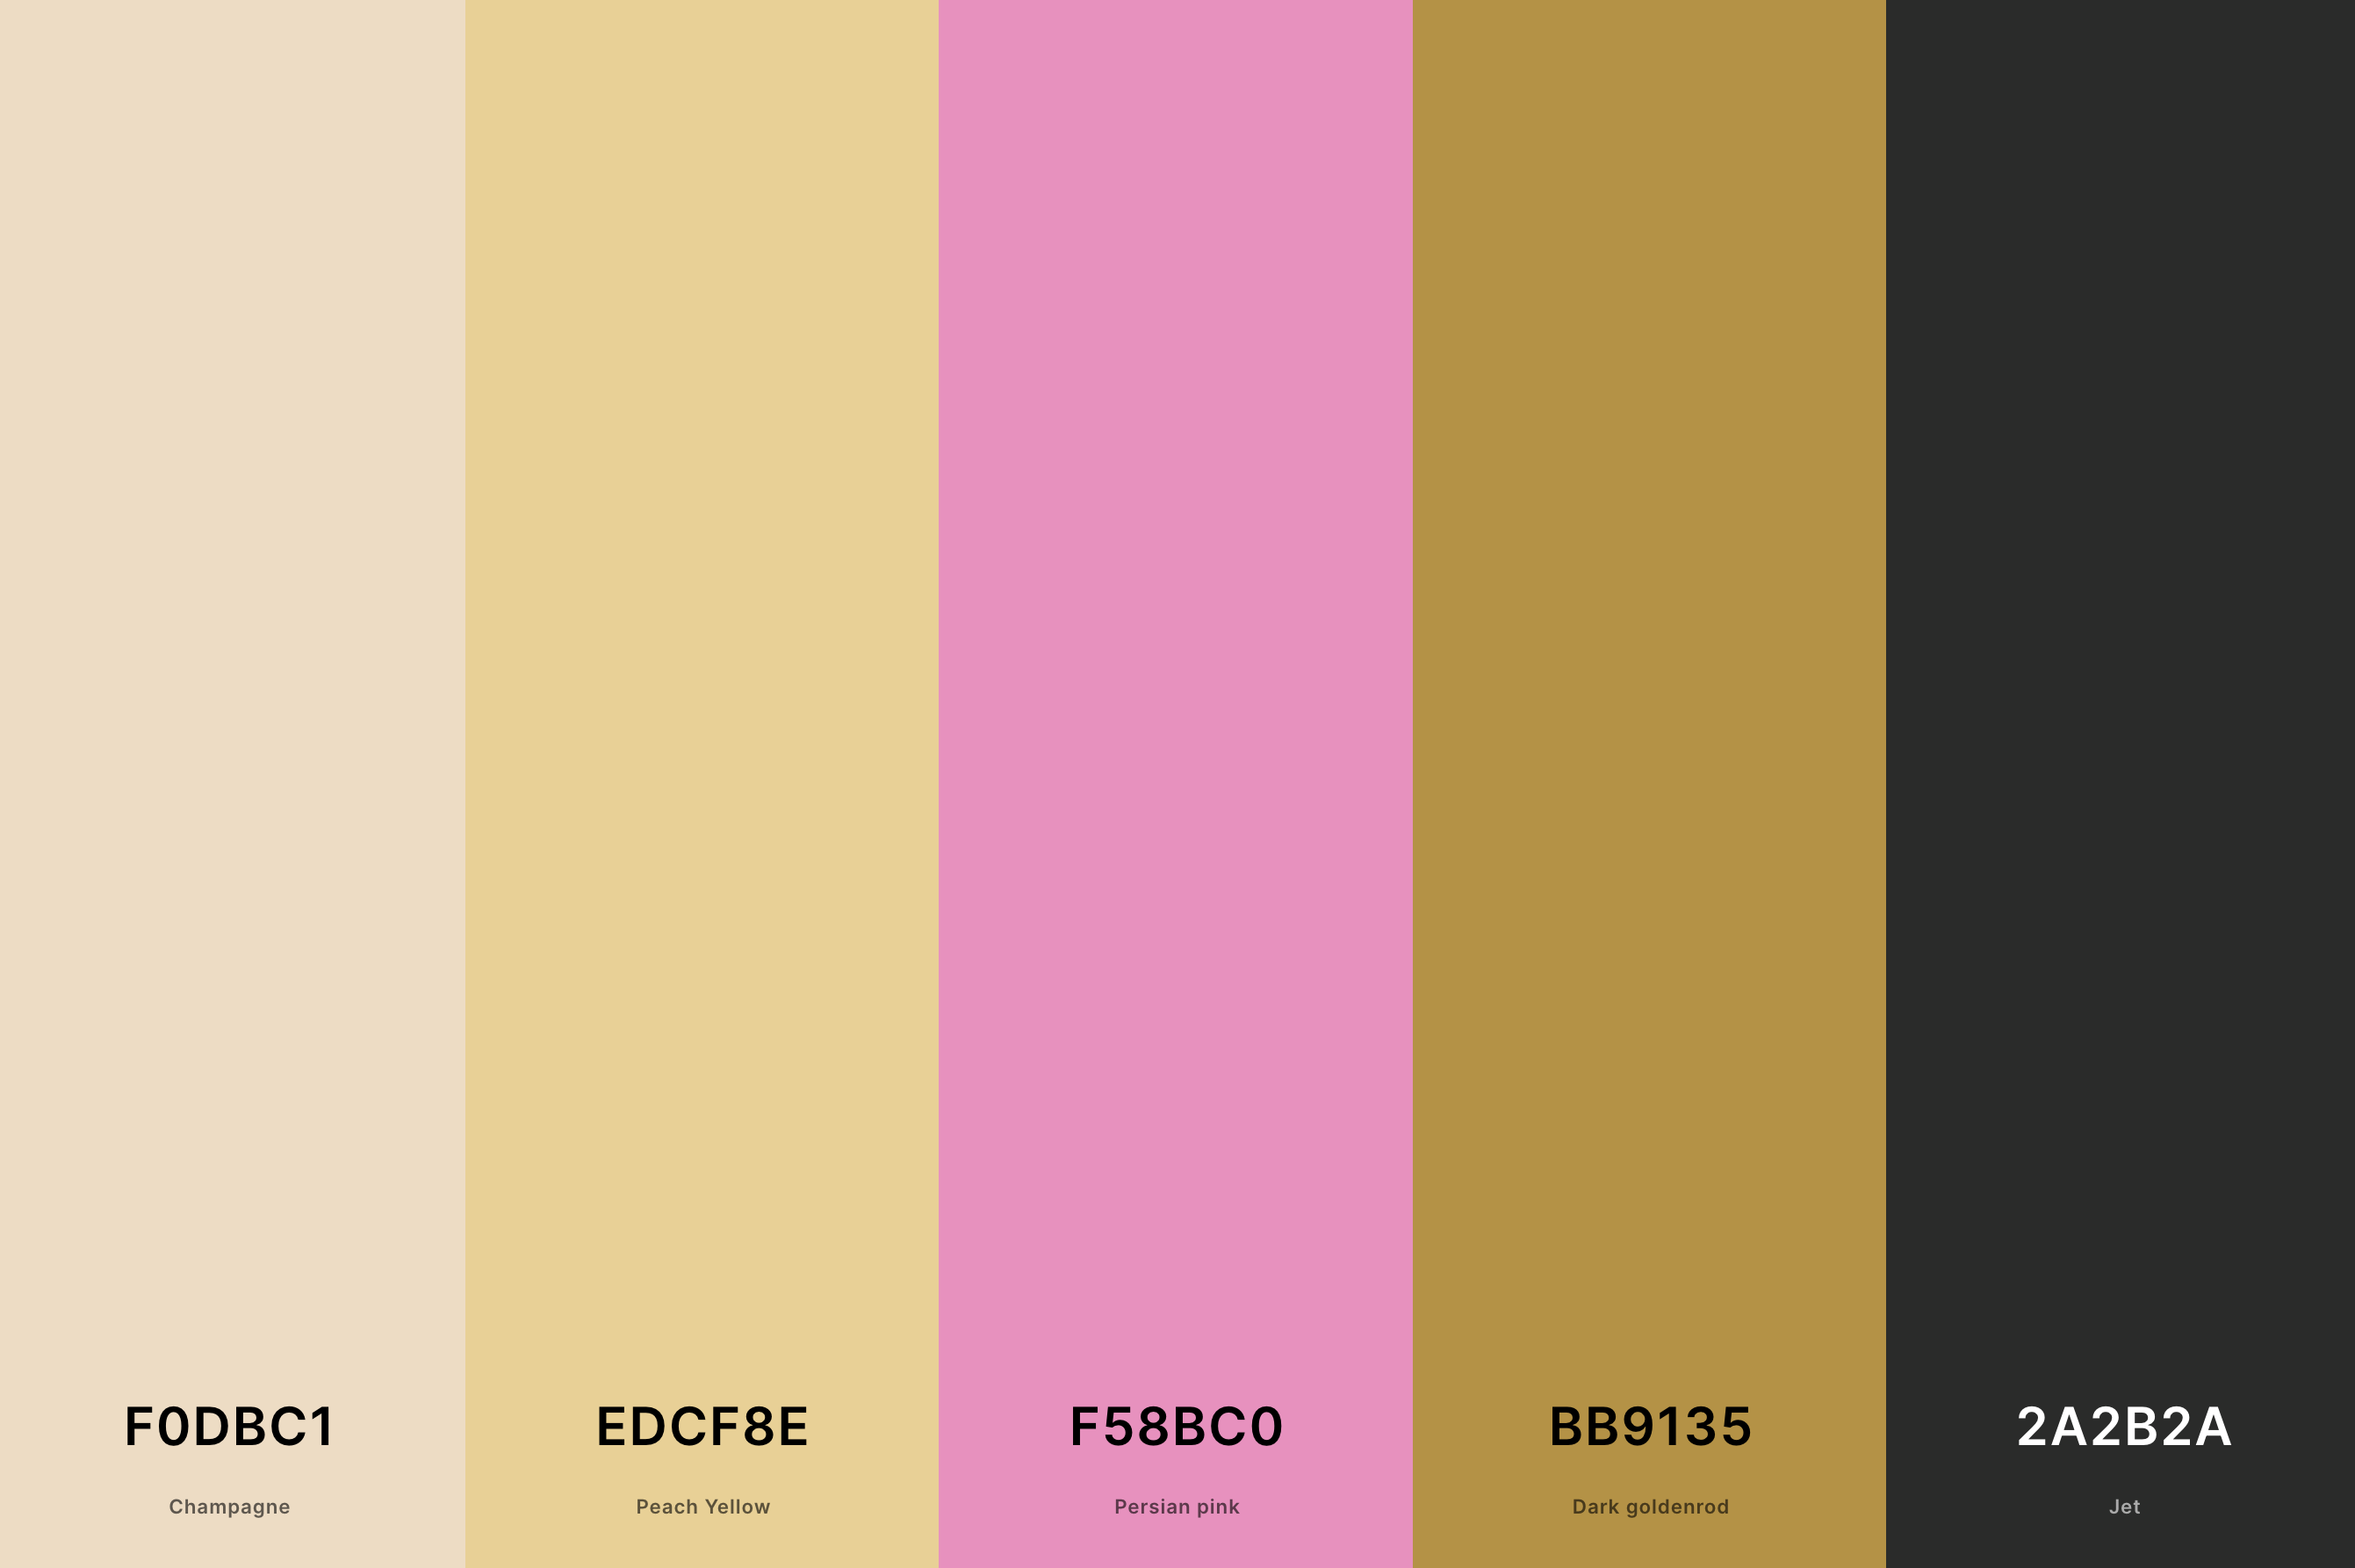 9. Champagne Gold Color Palette Color Palette with Champagne (Hex #F0DBC1) + Peach Yellow (Hex #EDCF8E) + Persian Pink (Hex #F58BC0) + Dark Goldenrod (Hex #BB9135) + Jet (Hex #2A2B2A) Color Palette with Hex Codes